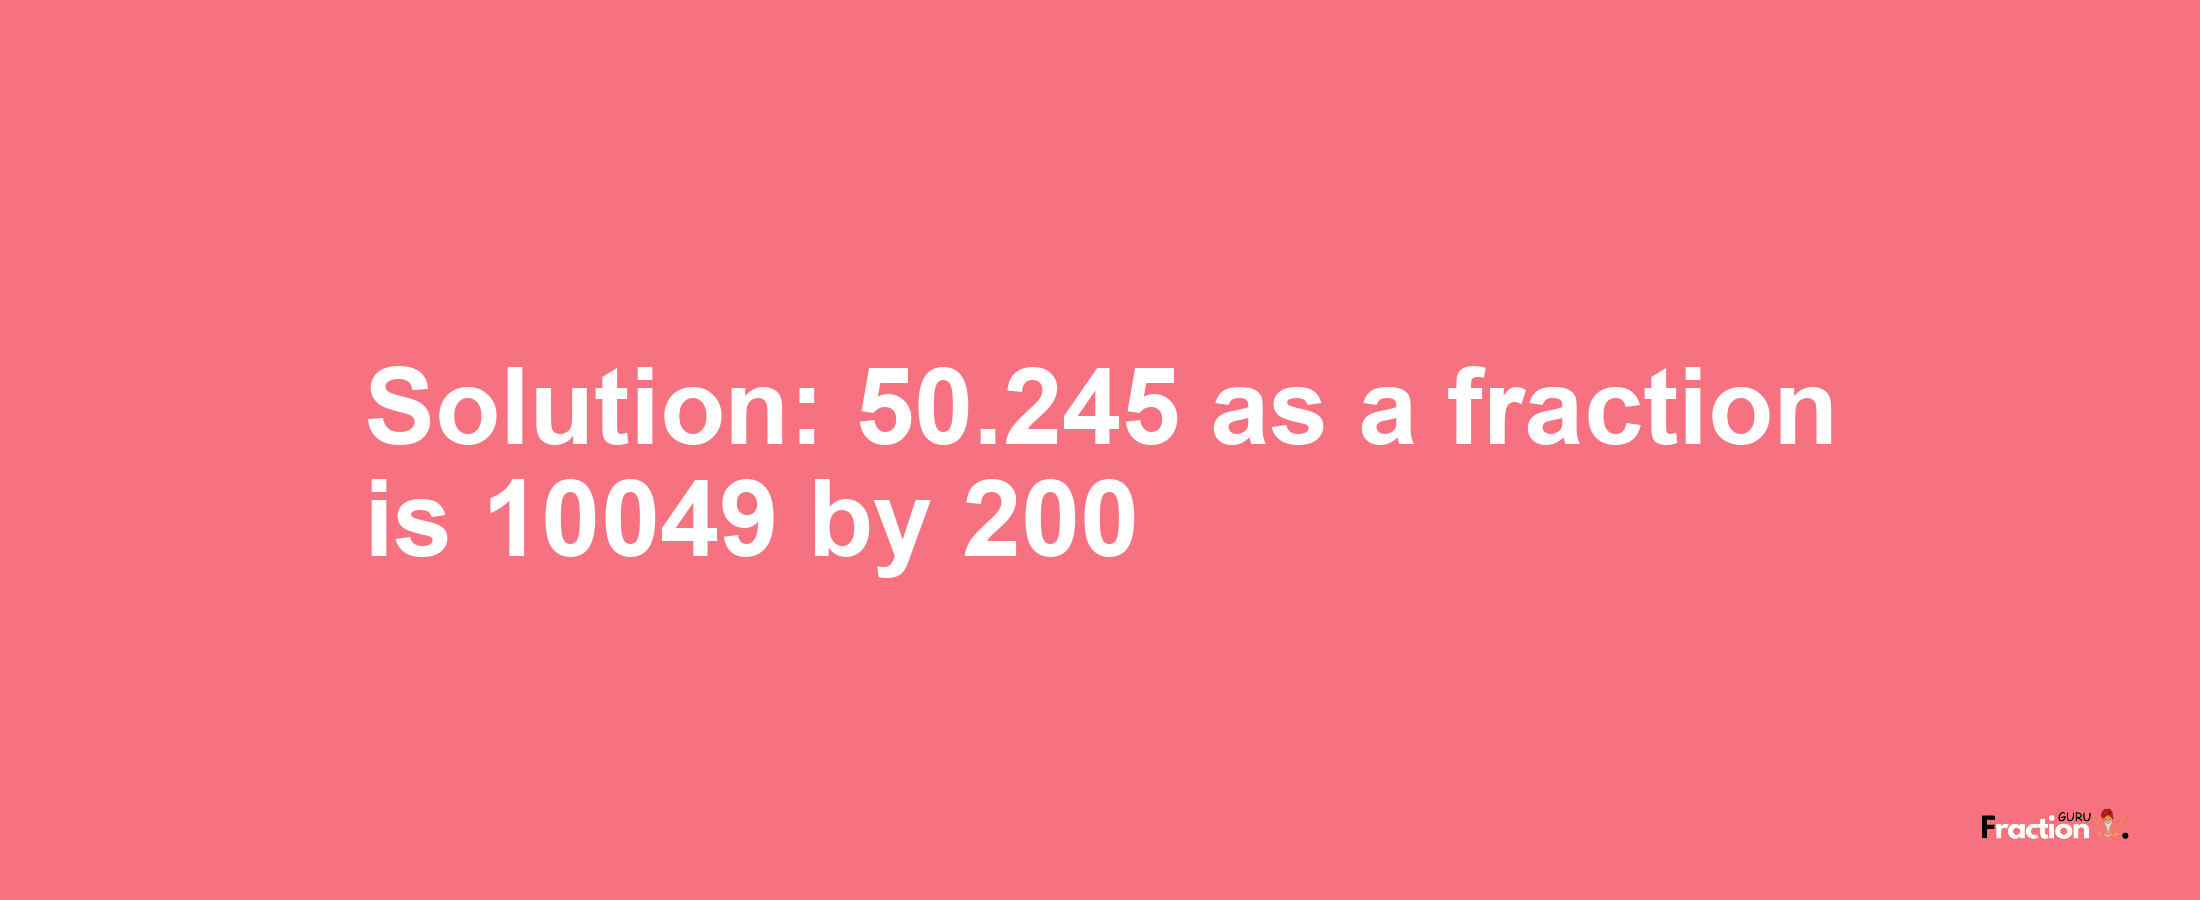 Solution:50.245 as a fraction is 10049/200